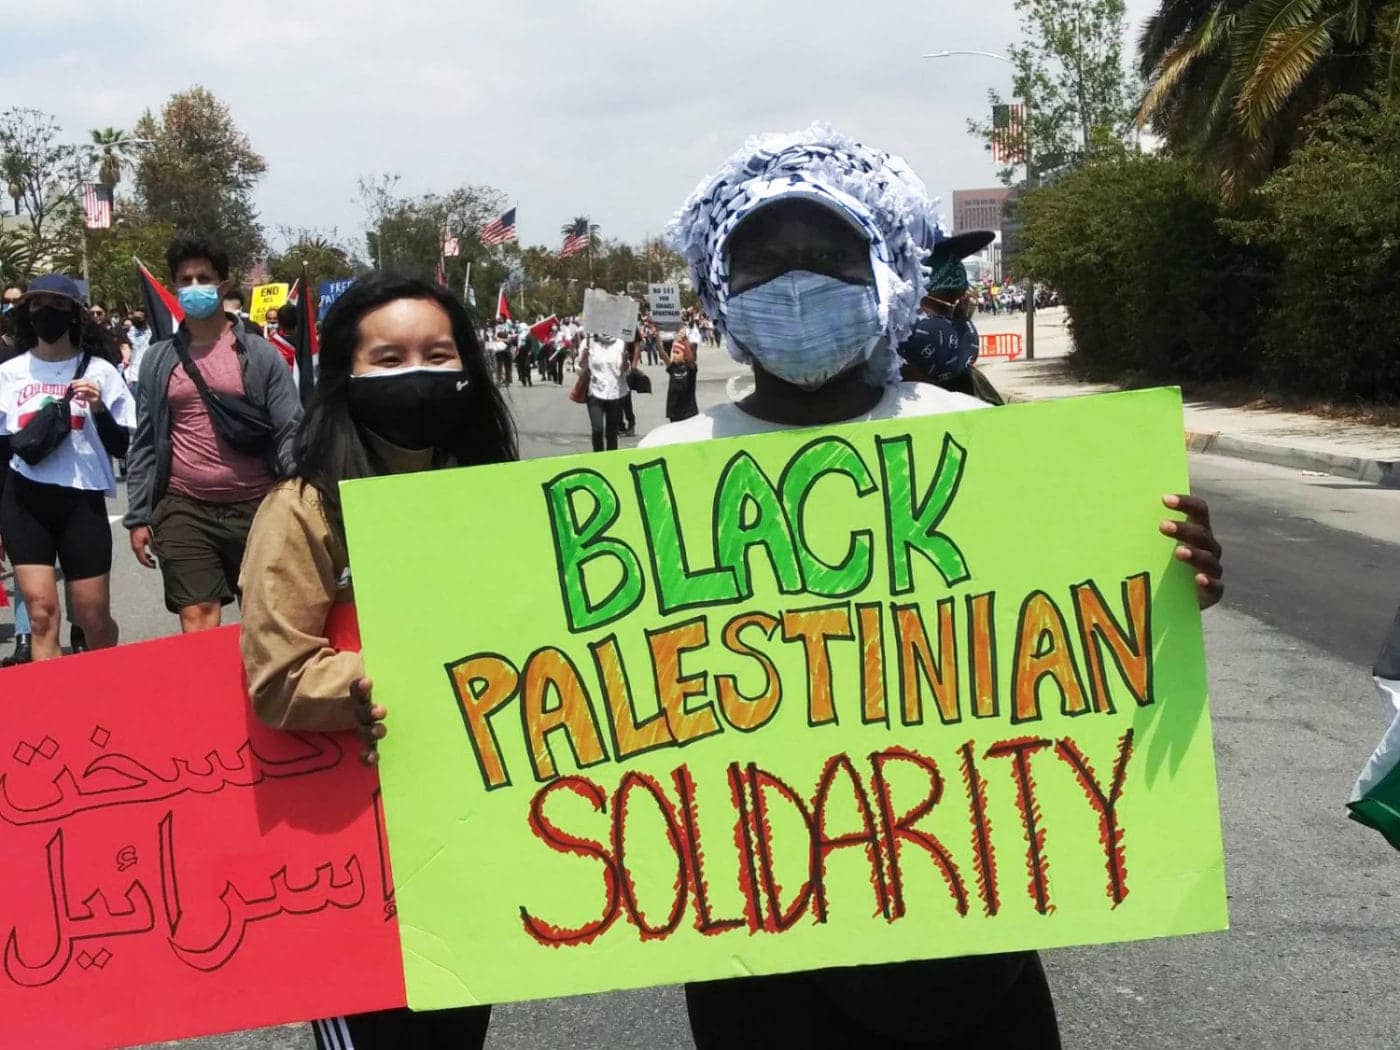 Black-Palestinian-Solidarity-march-0521-by-Julia-Wallace-1400x1050, Black and Palestinian struggle and the fight for Ethnic Studies in California, World News & Views 